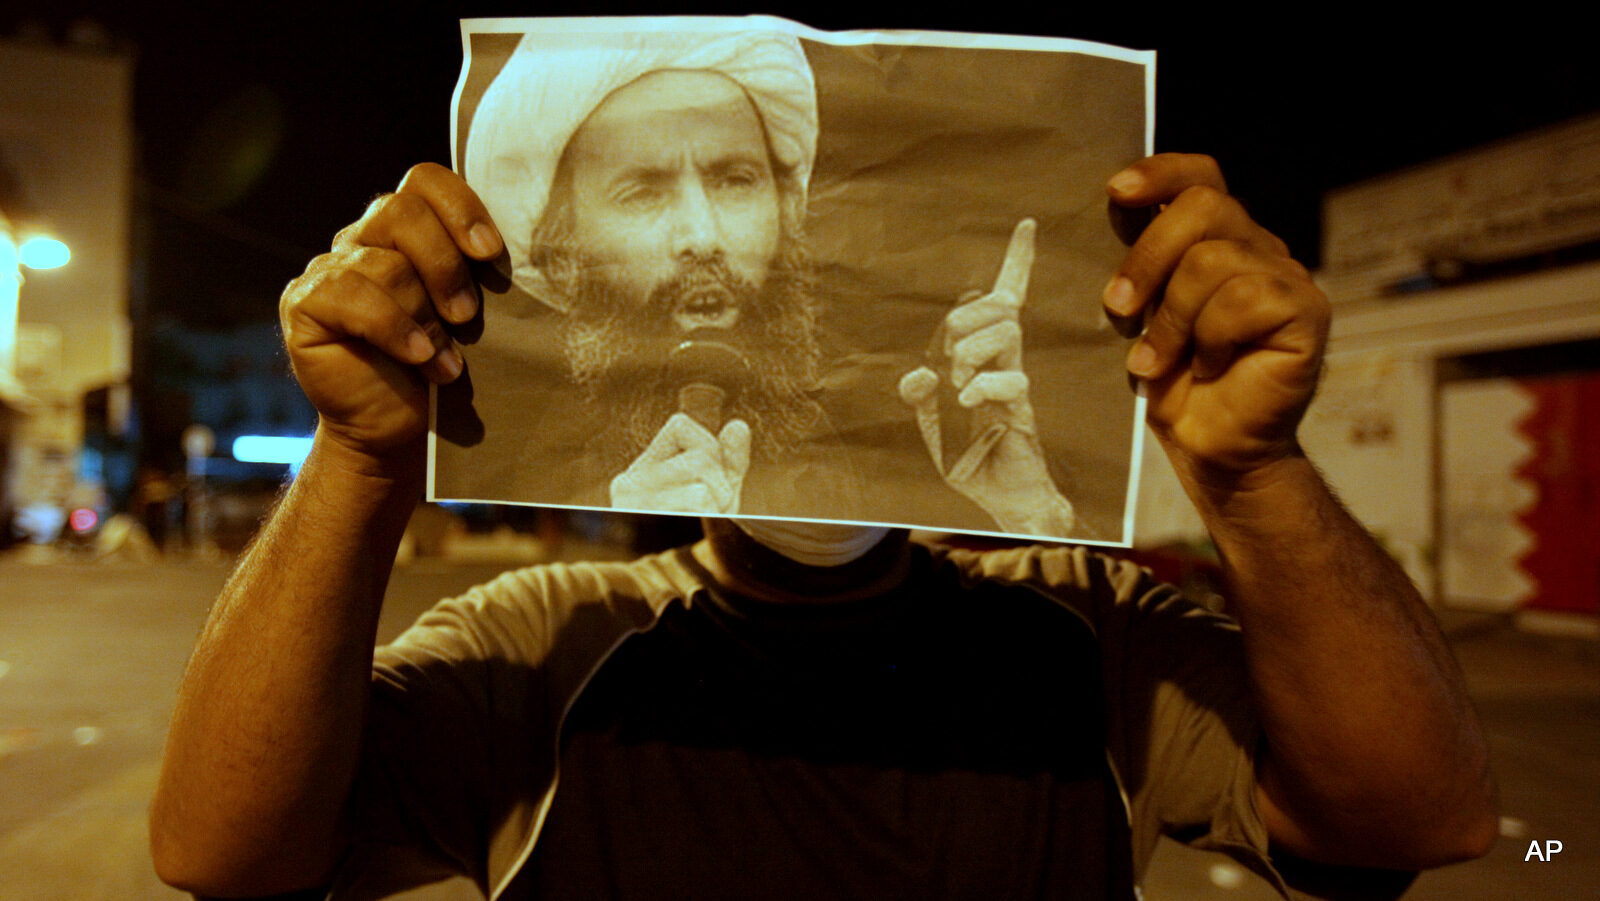 A Bahraini anti-government protester holds up a picture of jailed Saudi Sheik Nimr al-Nimr during clashes with riot police in Sanabis, Bahrain, a suburb of the capital Manama, Wednesday night, Oct. 15, 2014. The outspoken and widely revered Shiite cleric was convicted Wednesday in Saudi Arabia of sedition and other charges and sentenced to death, raising fears of renewed unrest from his supporters in the kingdom and neighboring Bahrain.